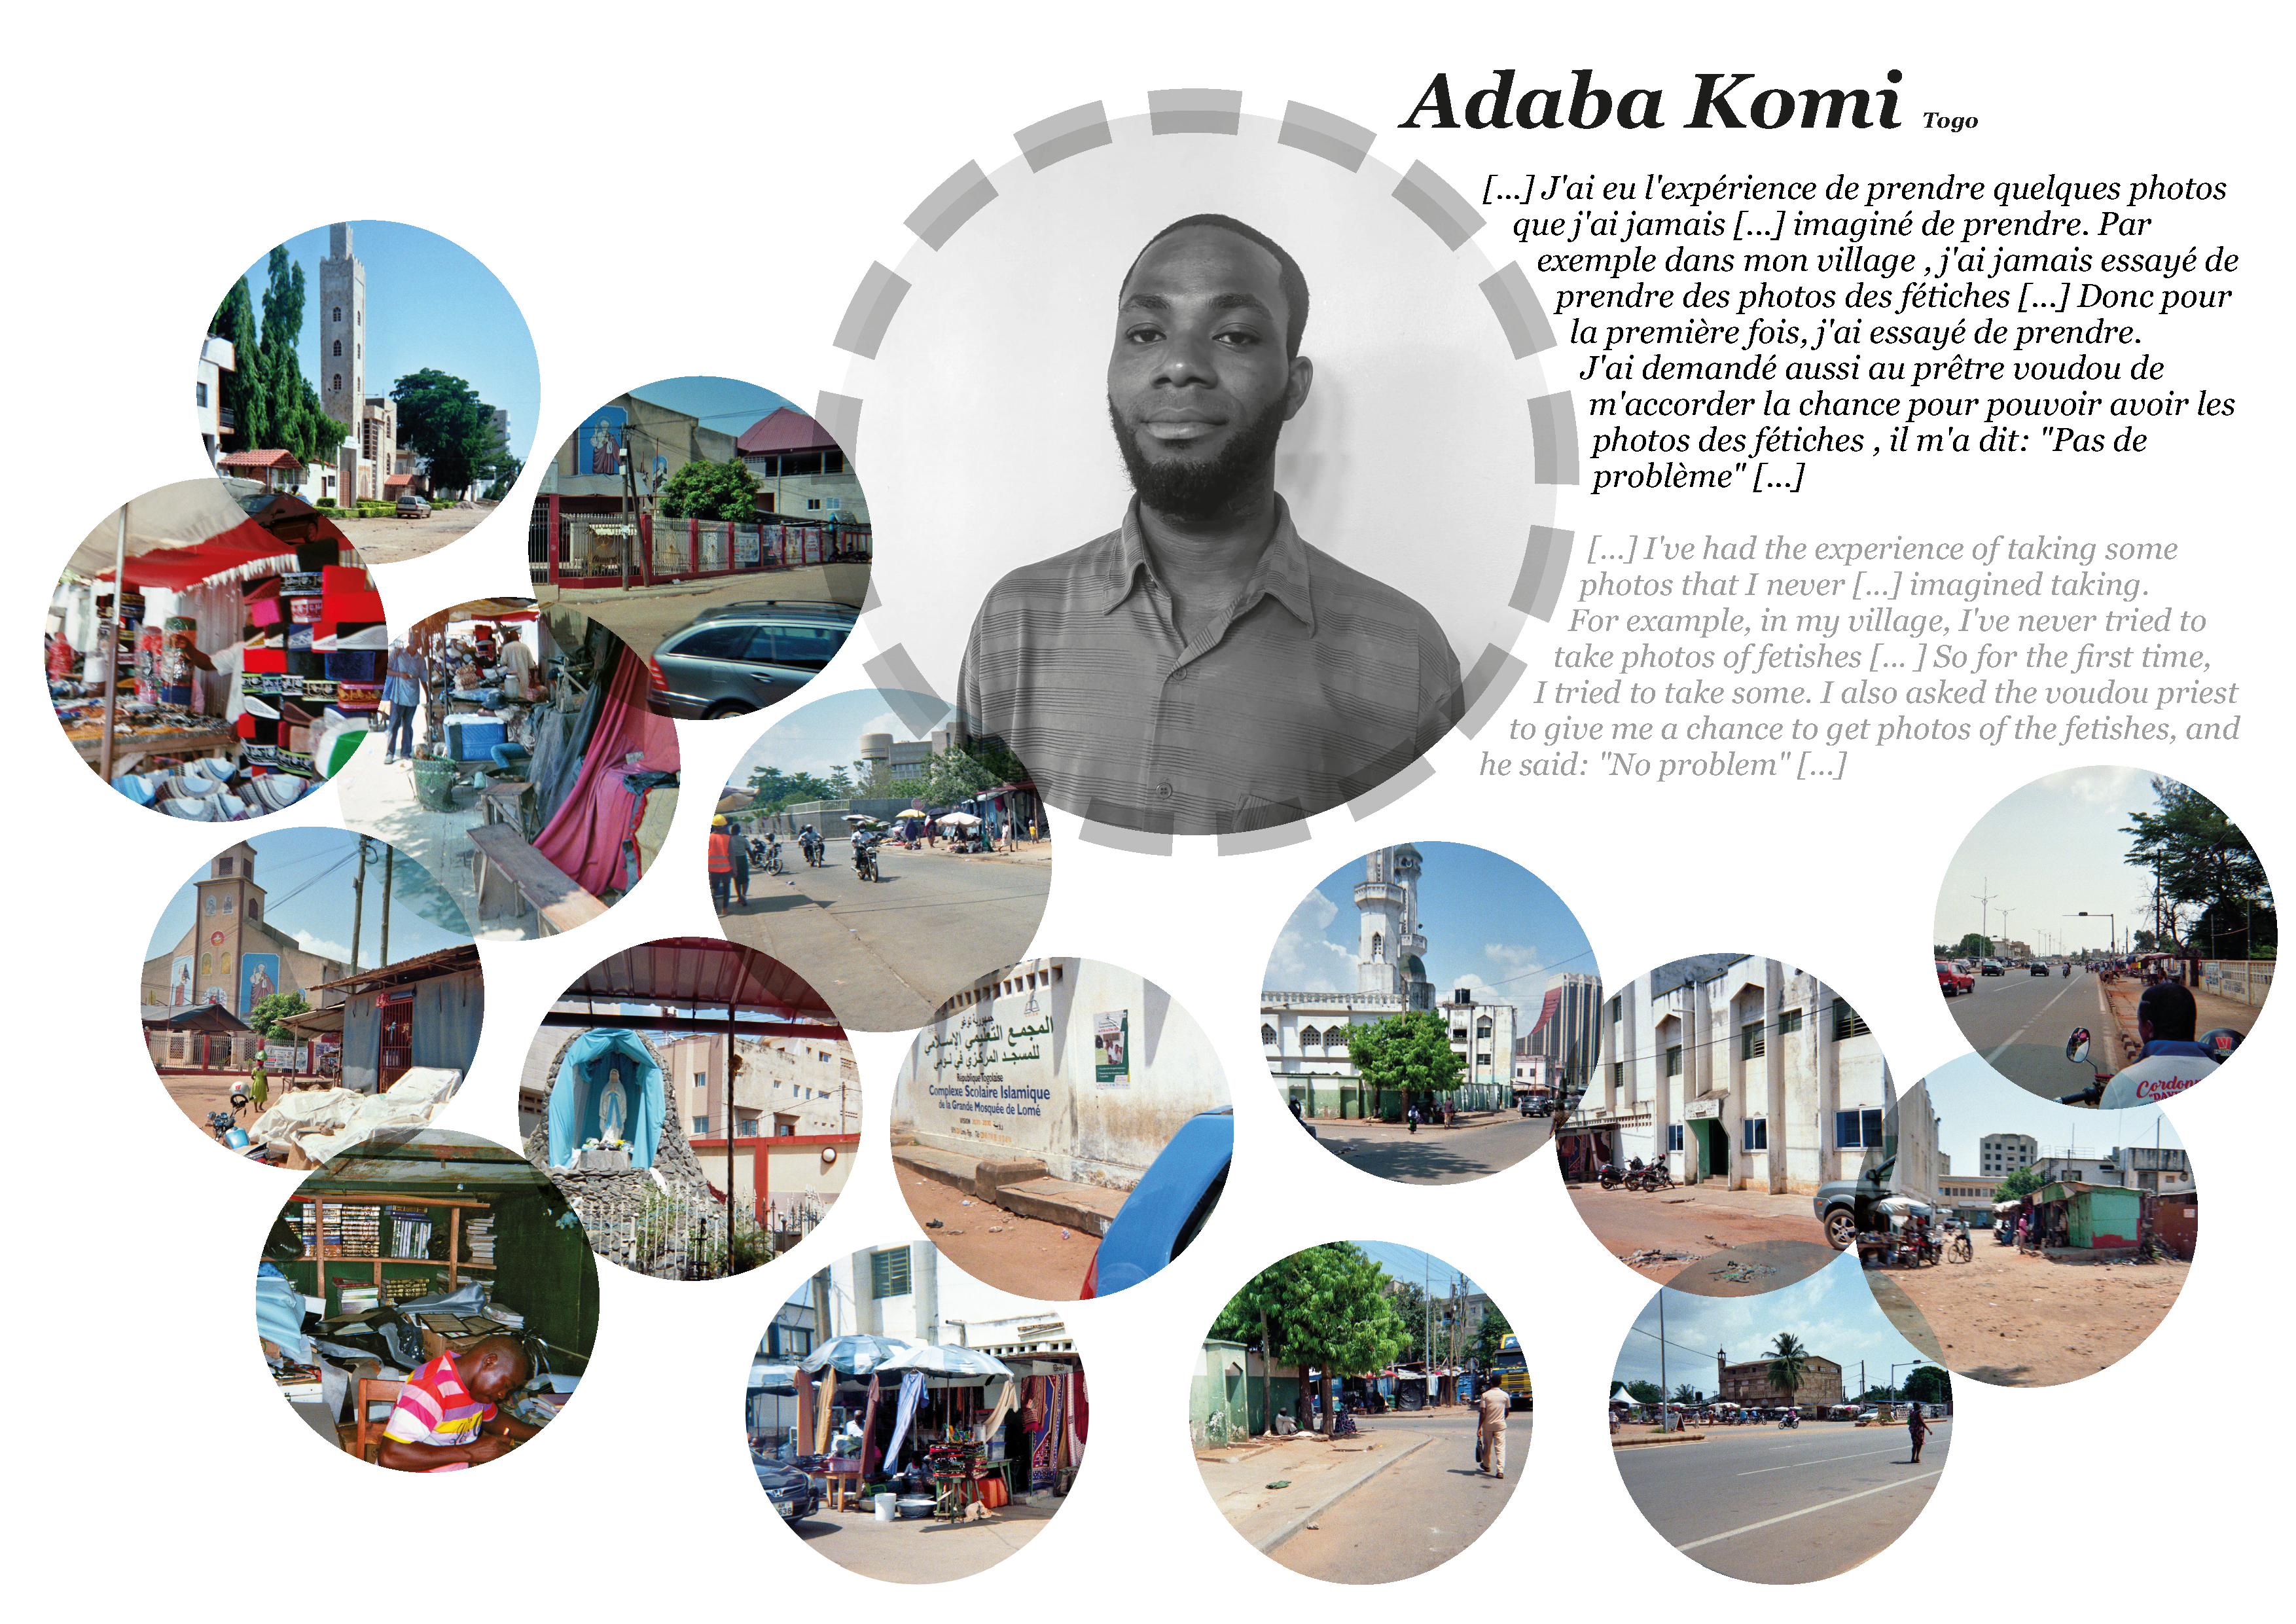 Collage of pictures of religion and peace by Adaba Komi in Togo